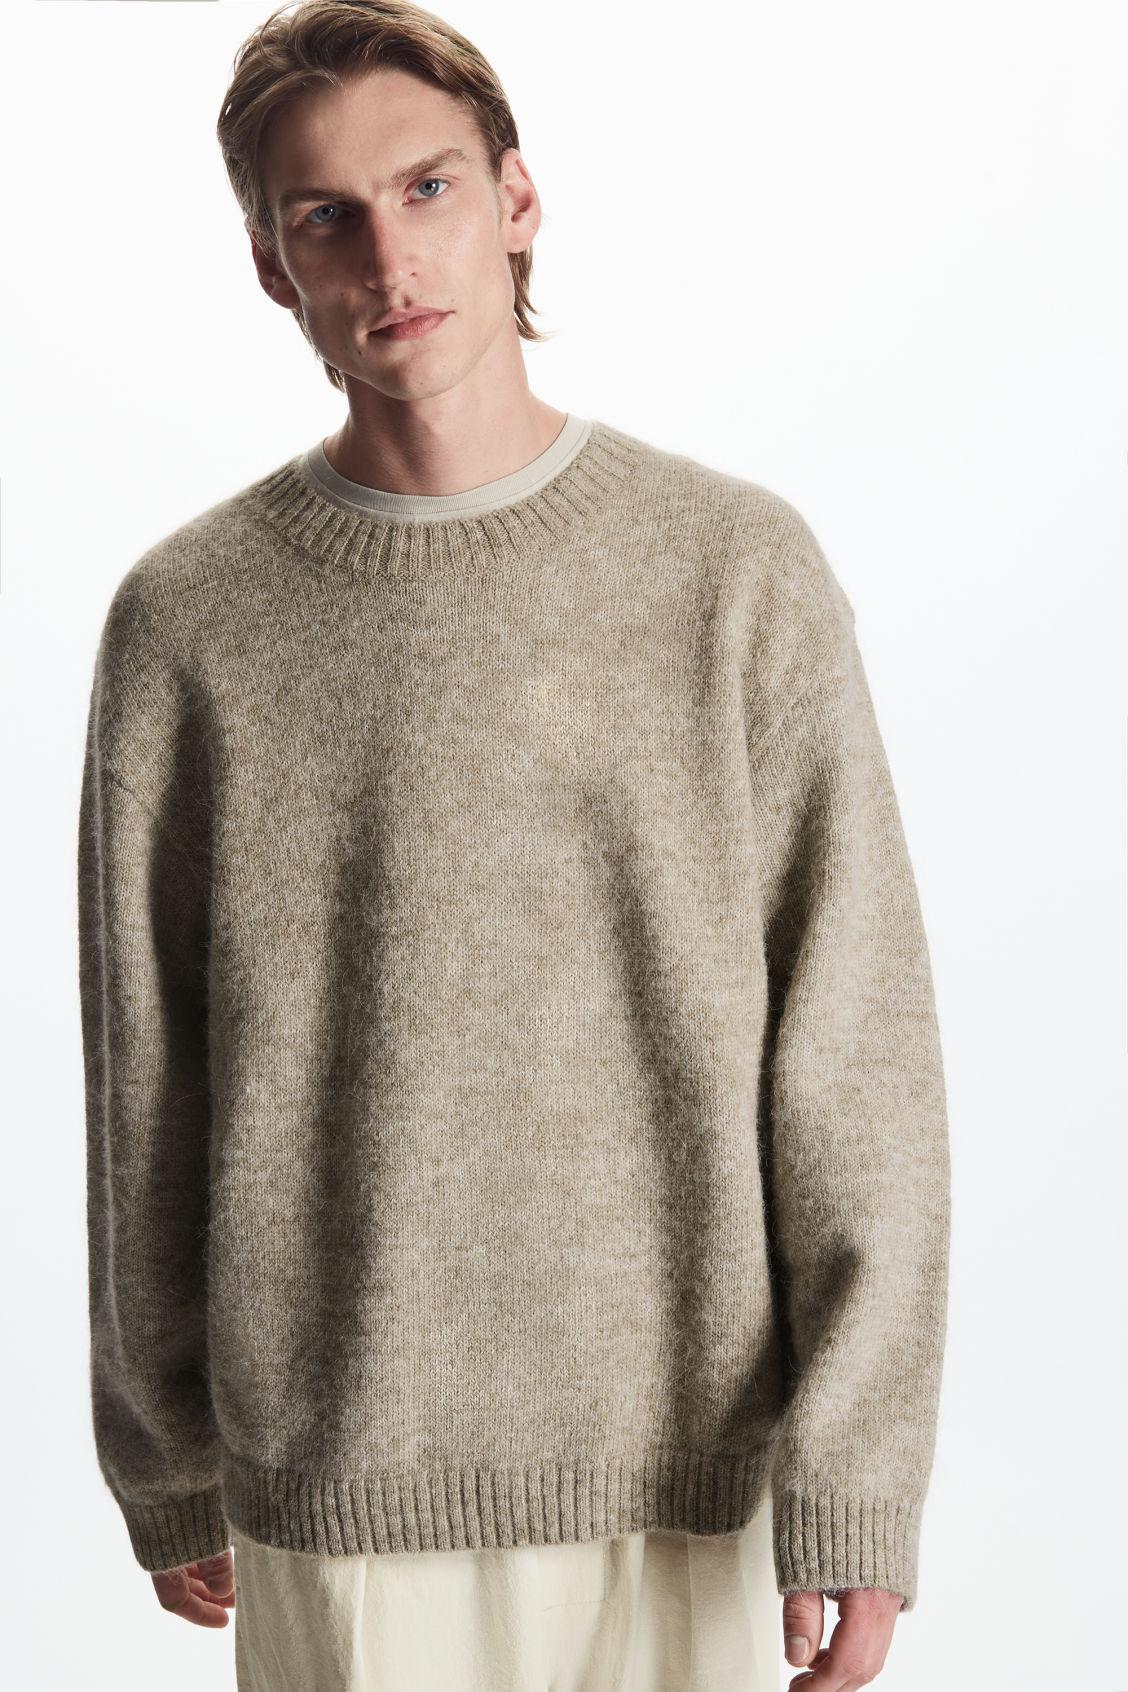 Disco Kunde Typisk COS Oversized Alpaca-blend Sweater in Natural for Men | Lyst